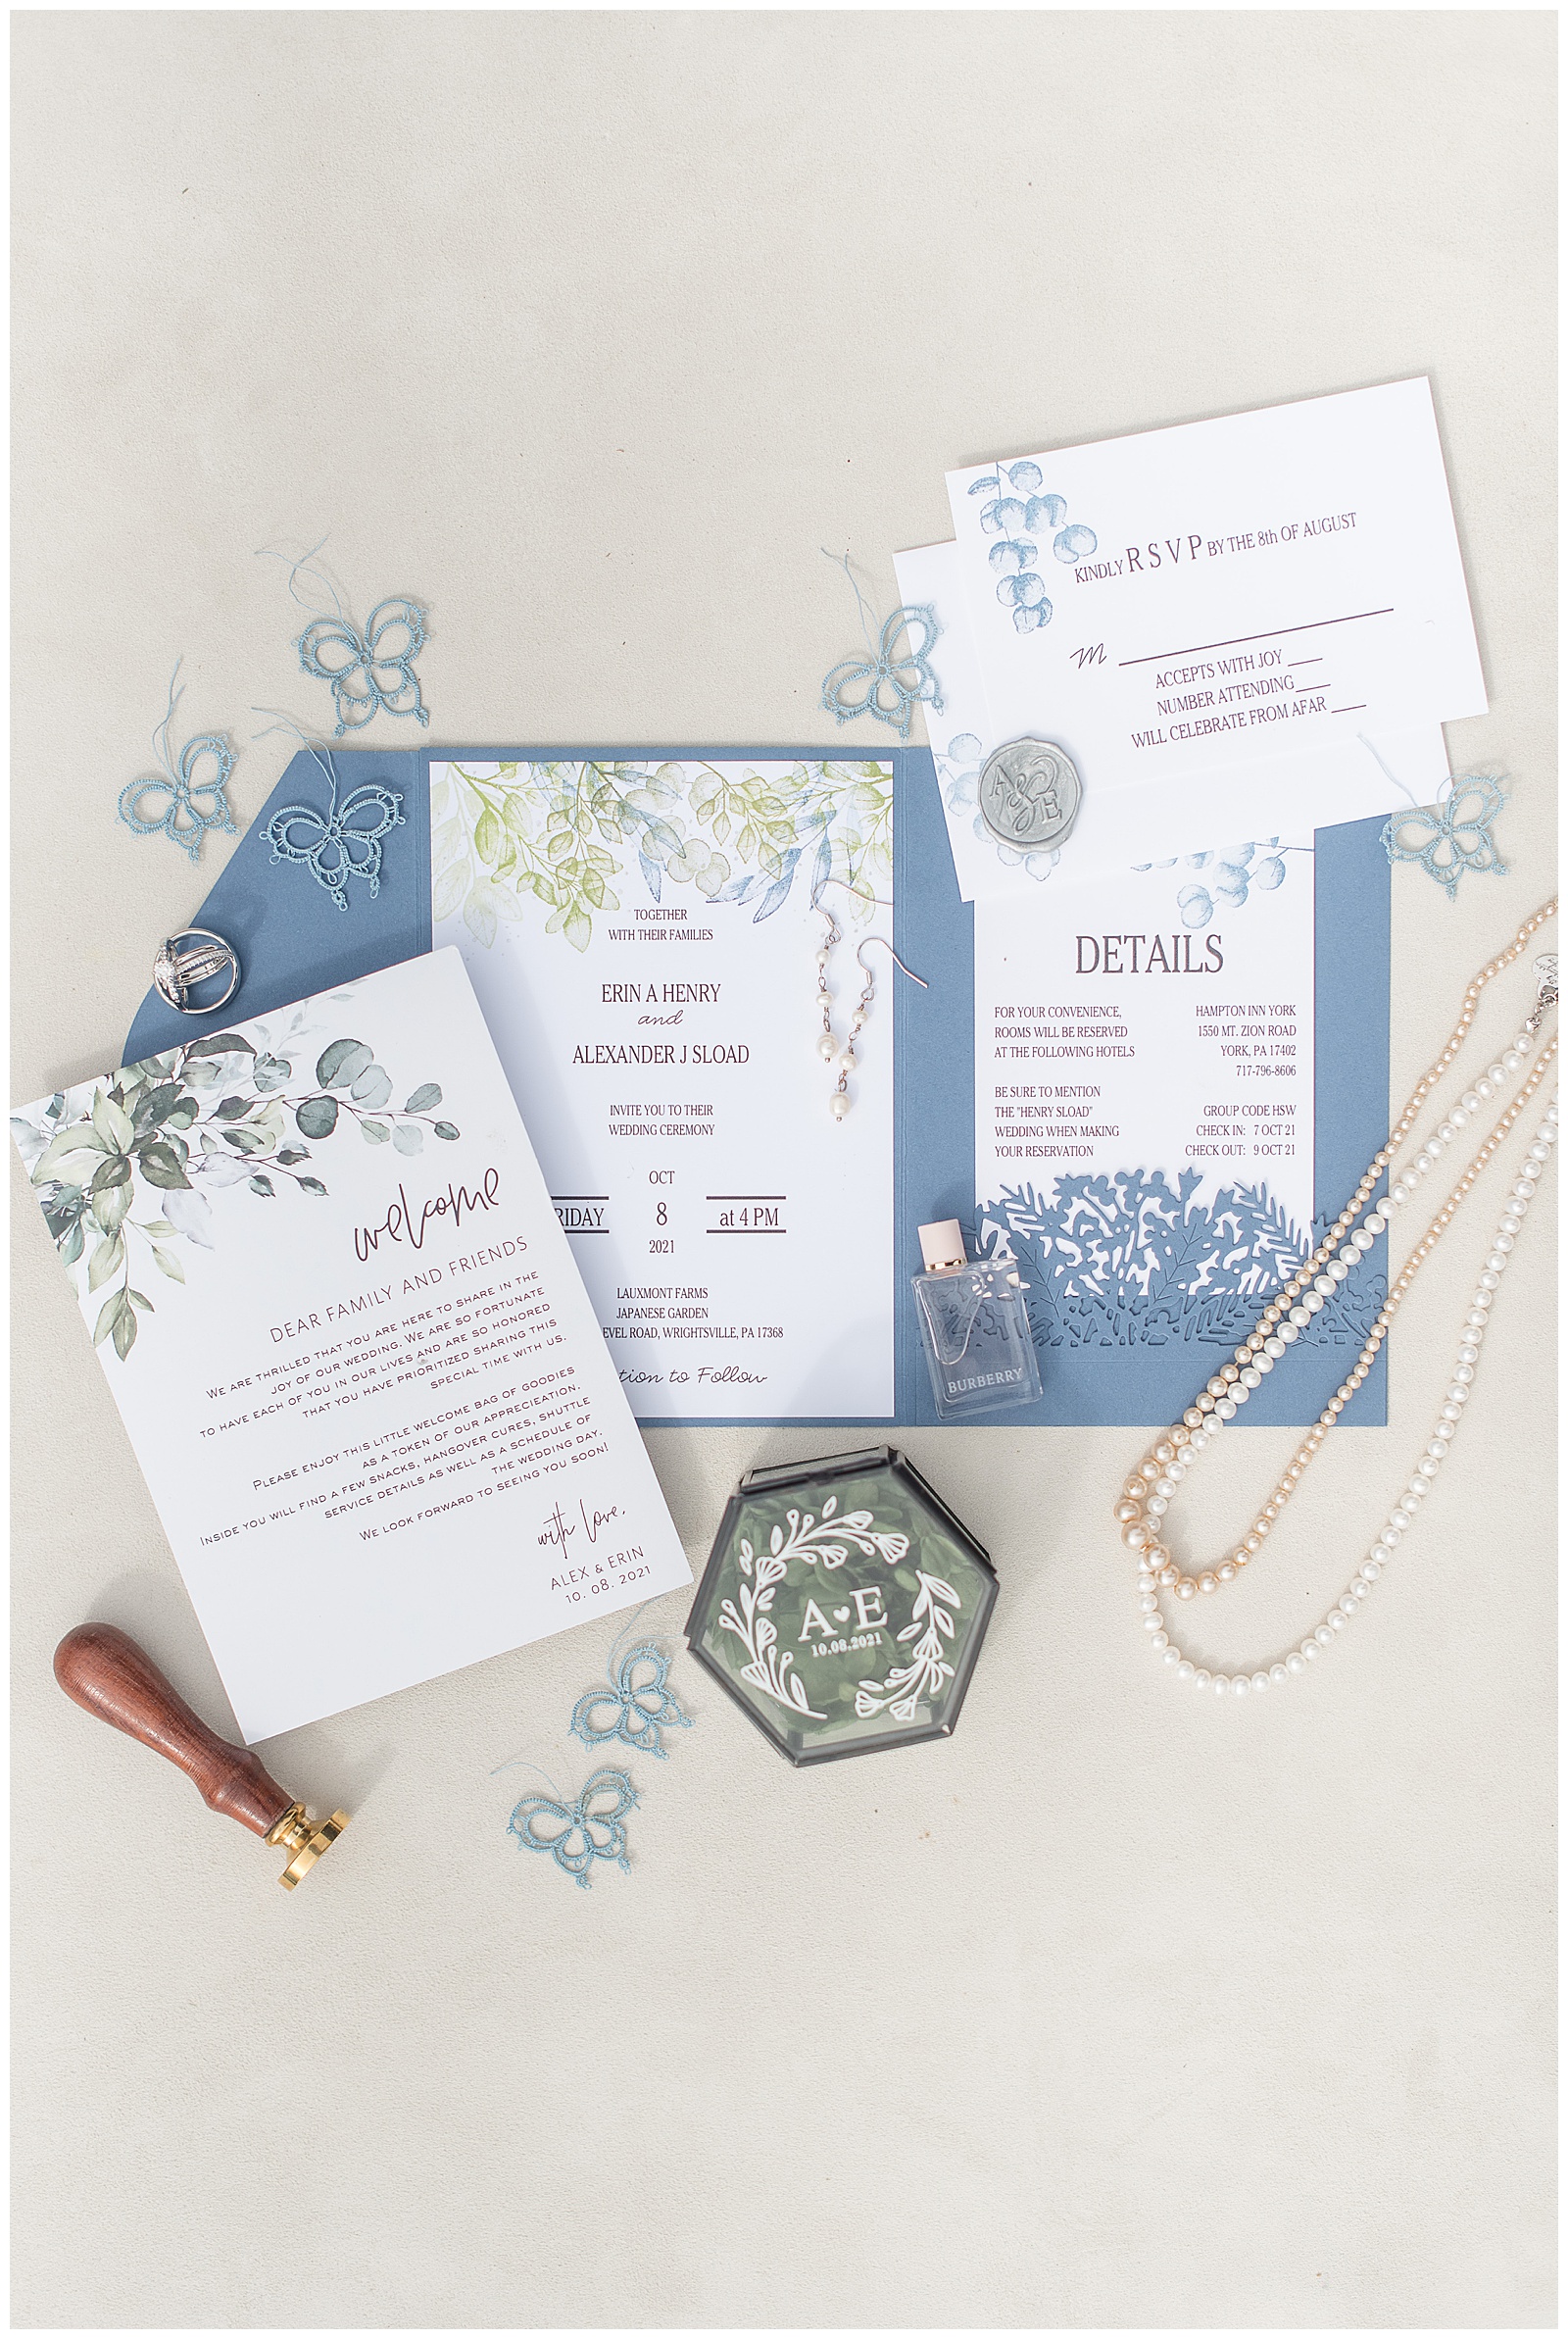 wedding invitation displayed by pearl necklaces, ring box, and other details at york pennsylvania wedding